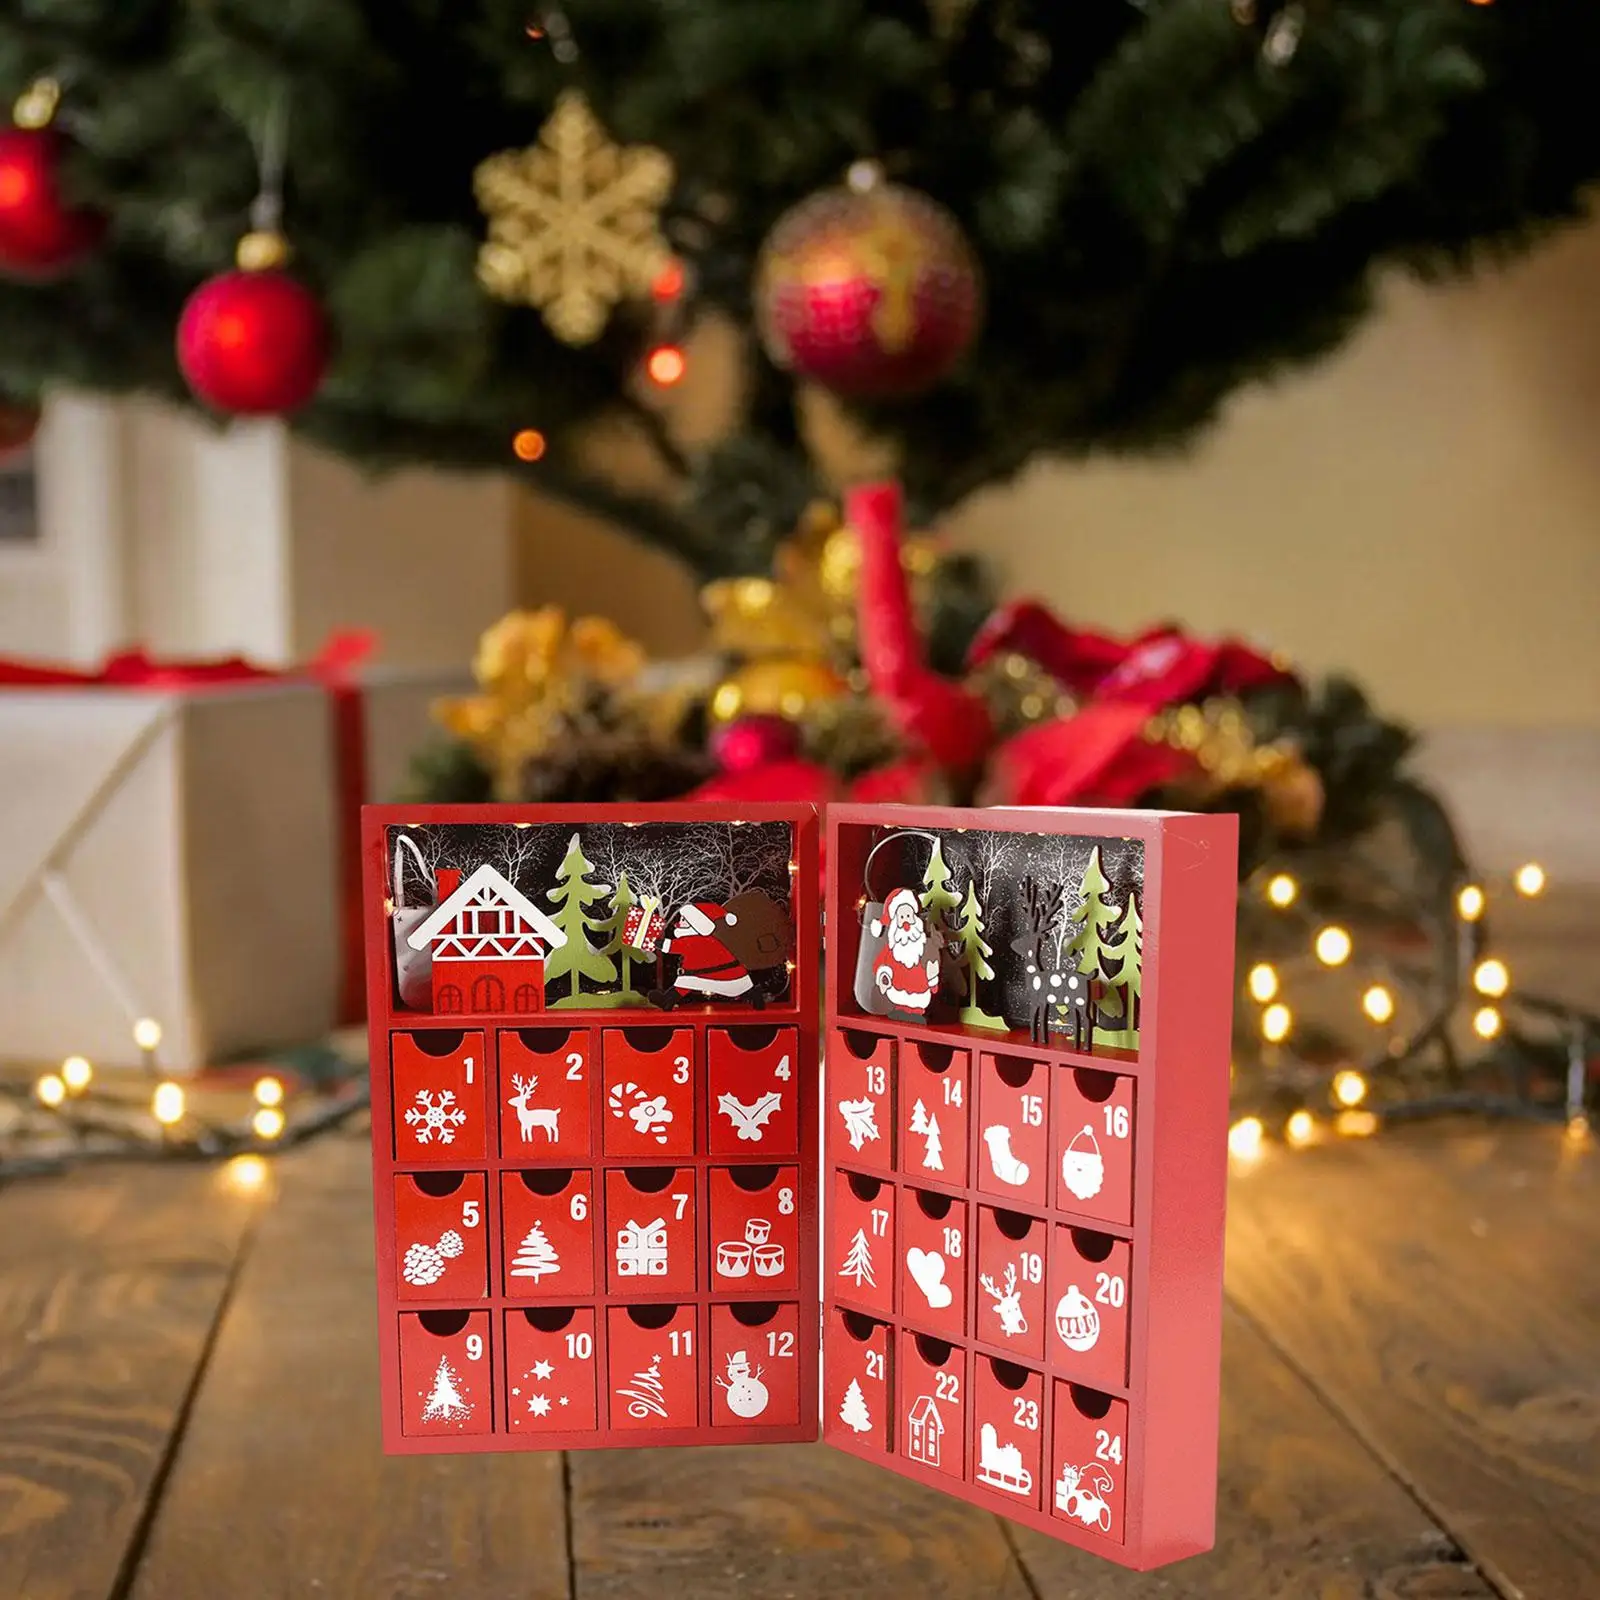 Fillable Calendar Box Santa Claus Pattern Candy Organizer with Storage Drawers Wood for Holiday Tabletop Home Xmas Decoration